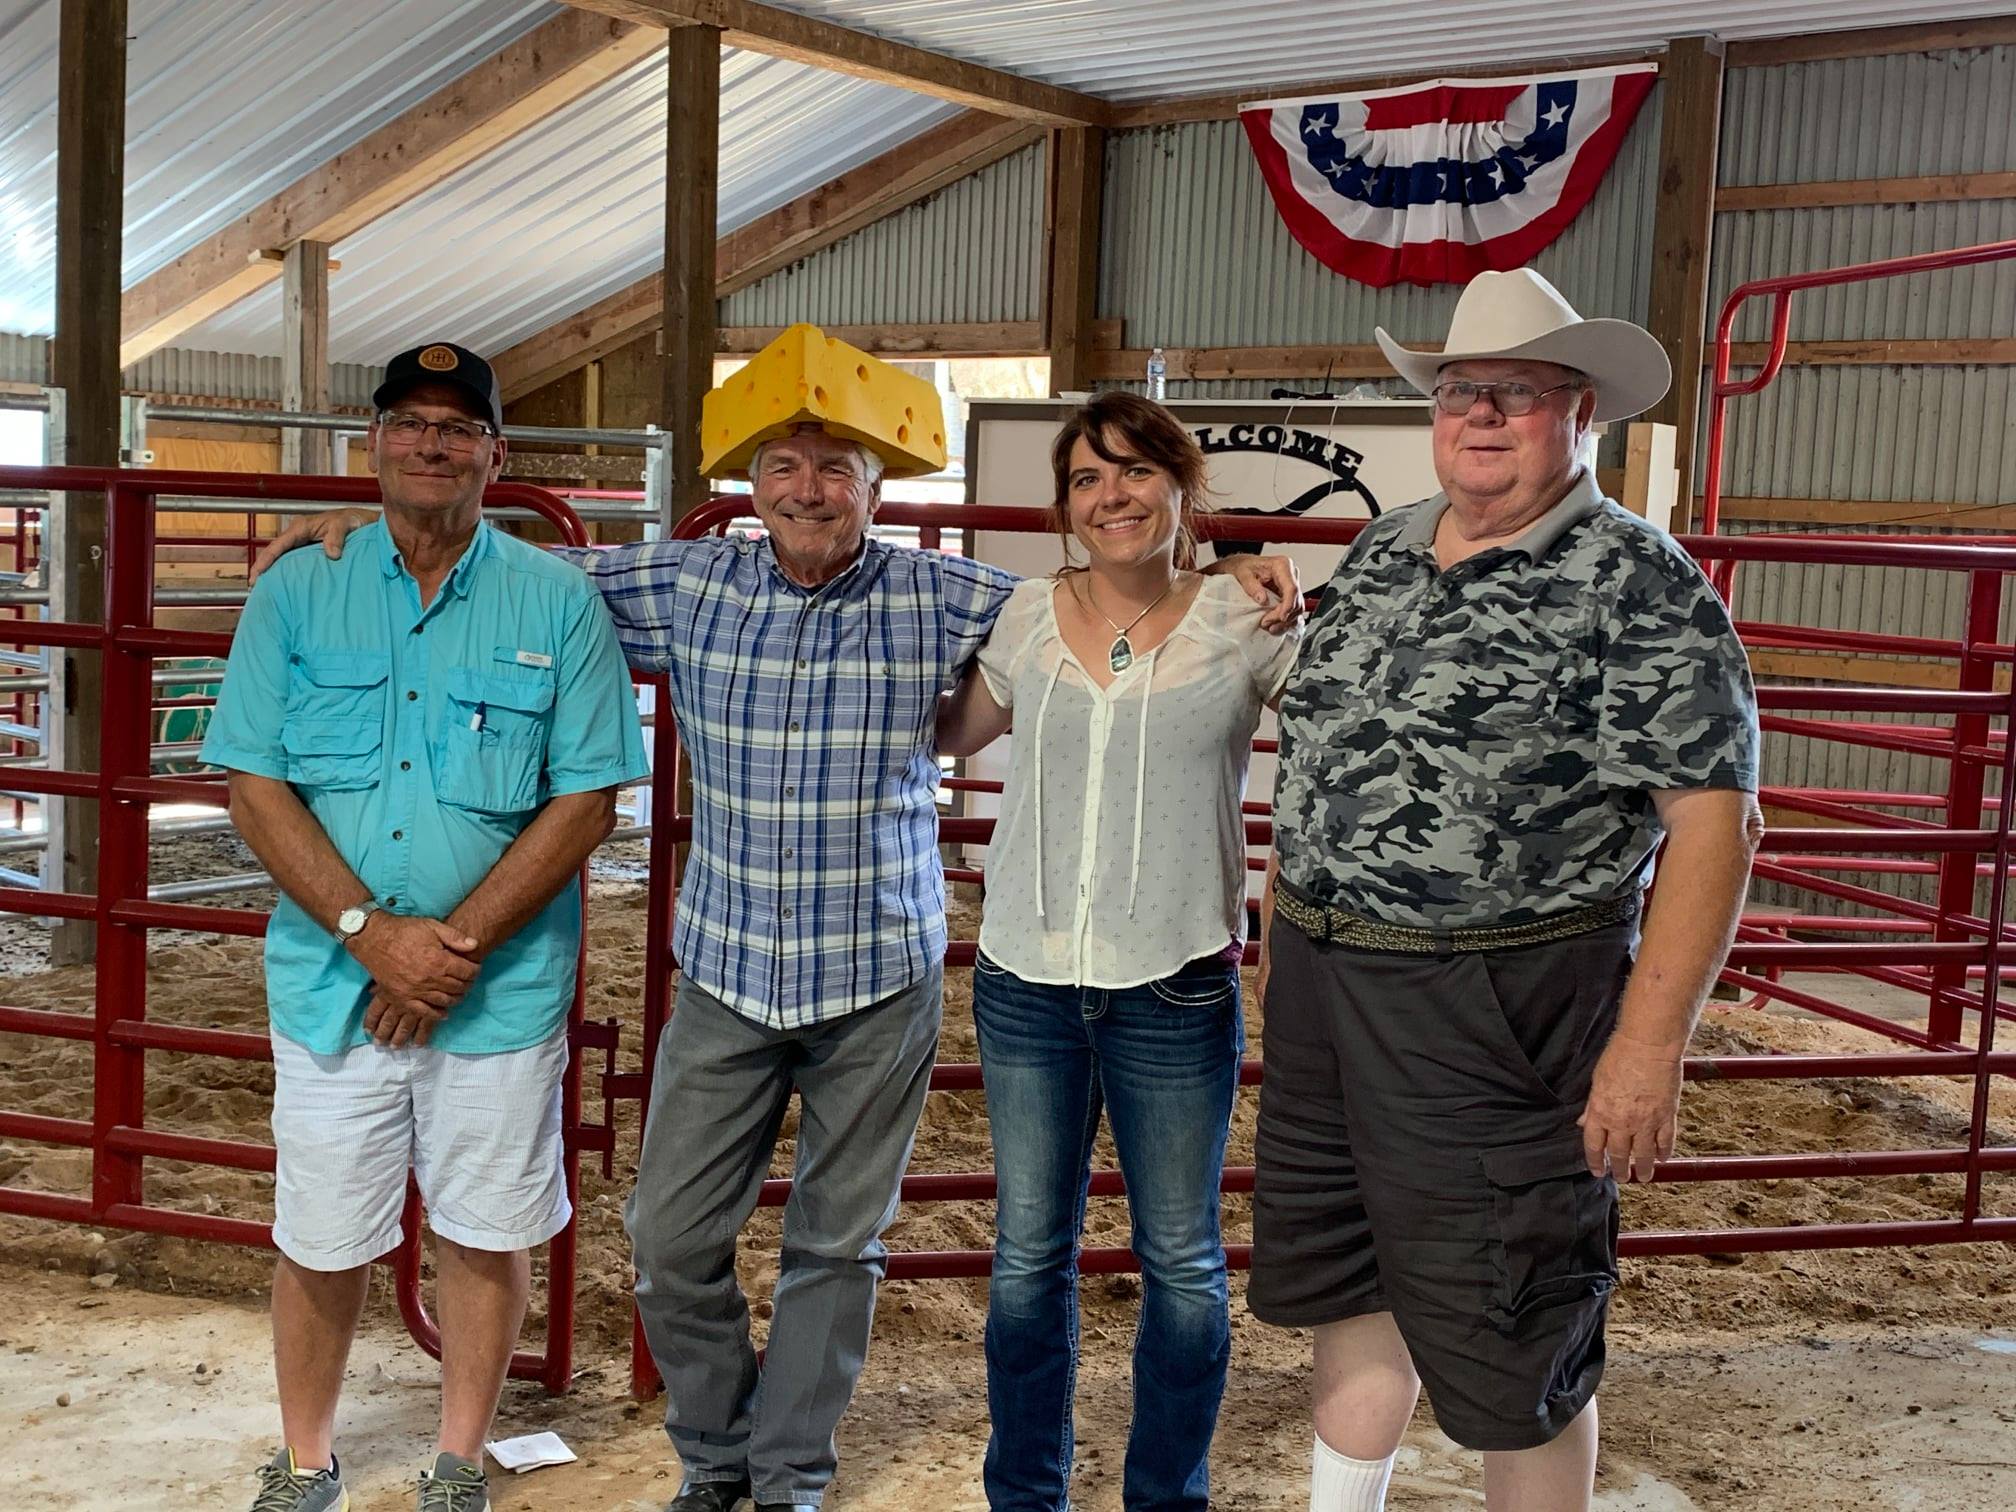 GNTLA Futurity Judges Hired Hand customers Jay Wachter, Sunhaven Farm and Dale Metz, FHR Longhorns with Melissa Boerst, Silver Summit Ranch and Dick Lowe, Triple R Longhorns